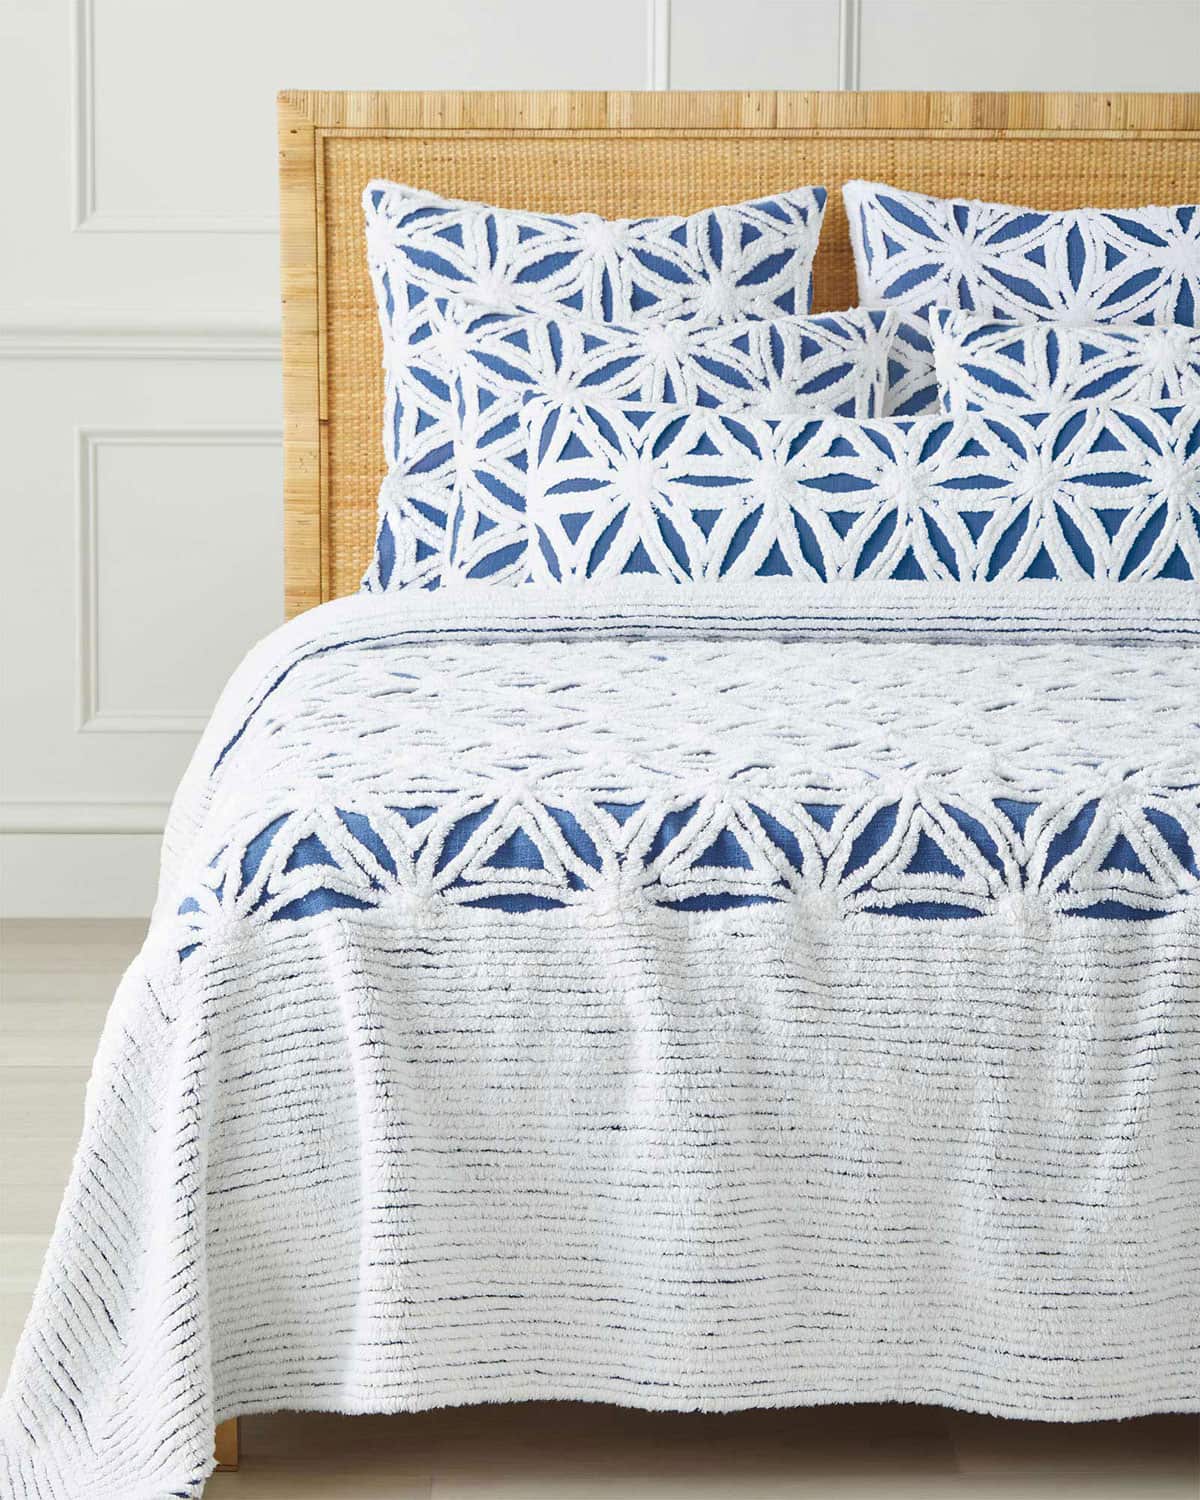 Serena and Lily Home Decor Ideas new beach inspired bedding with a vintage vibe